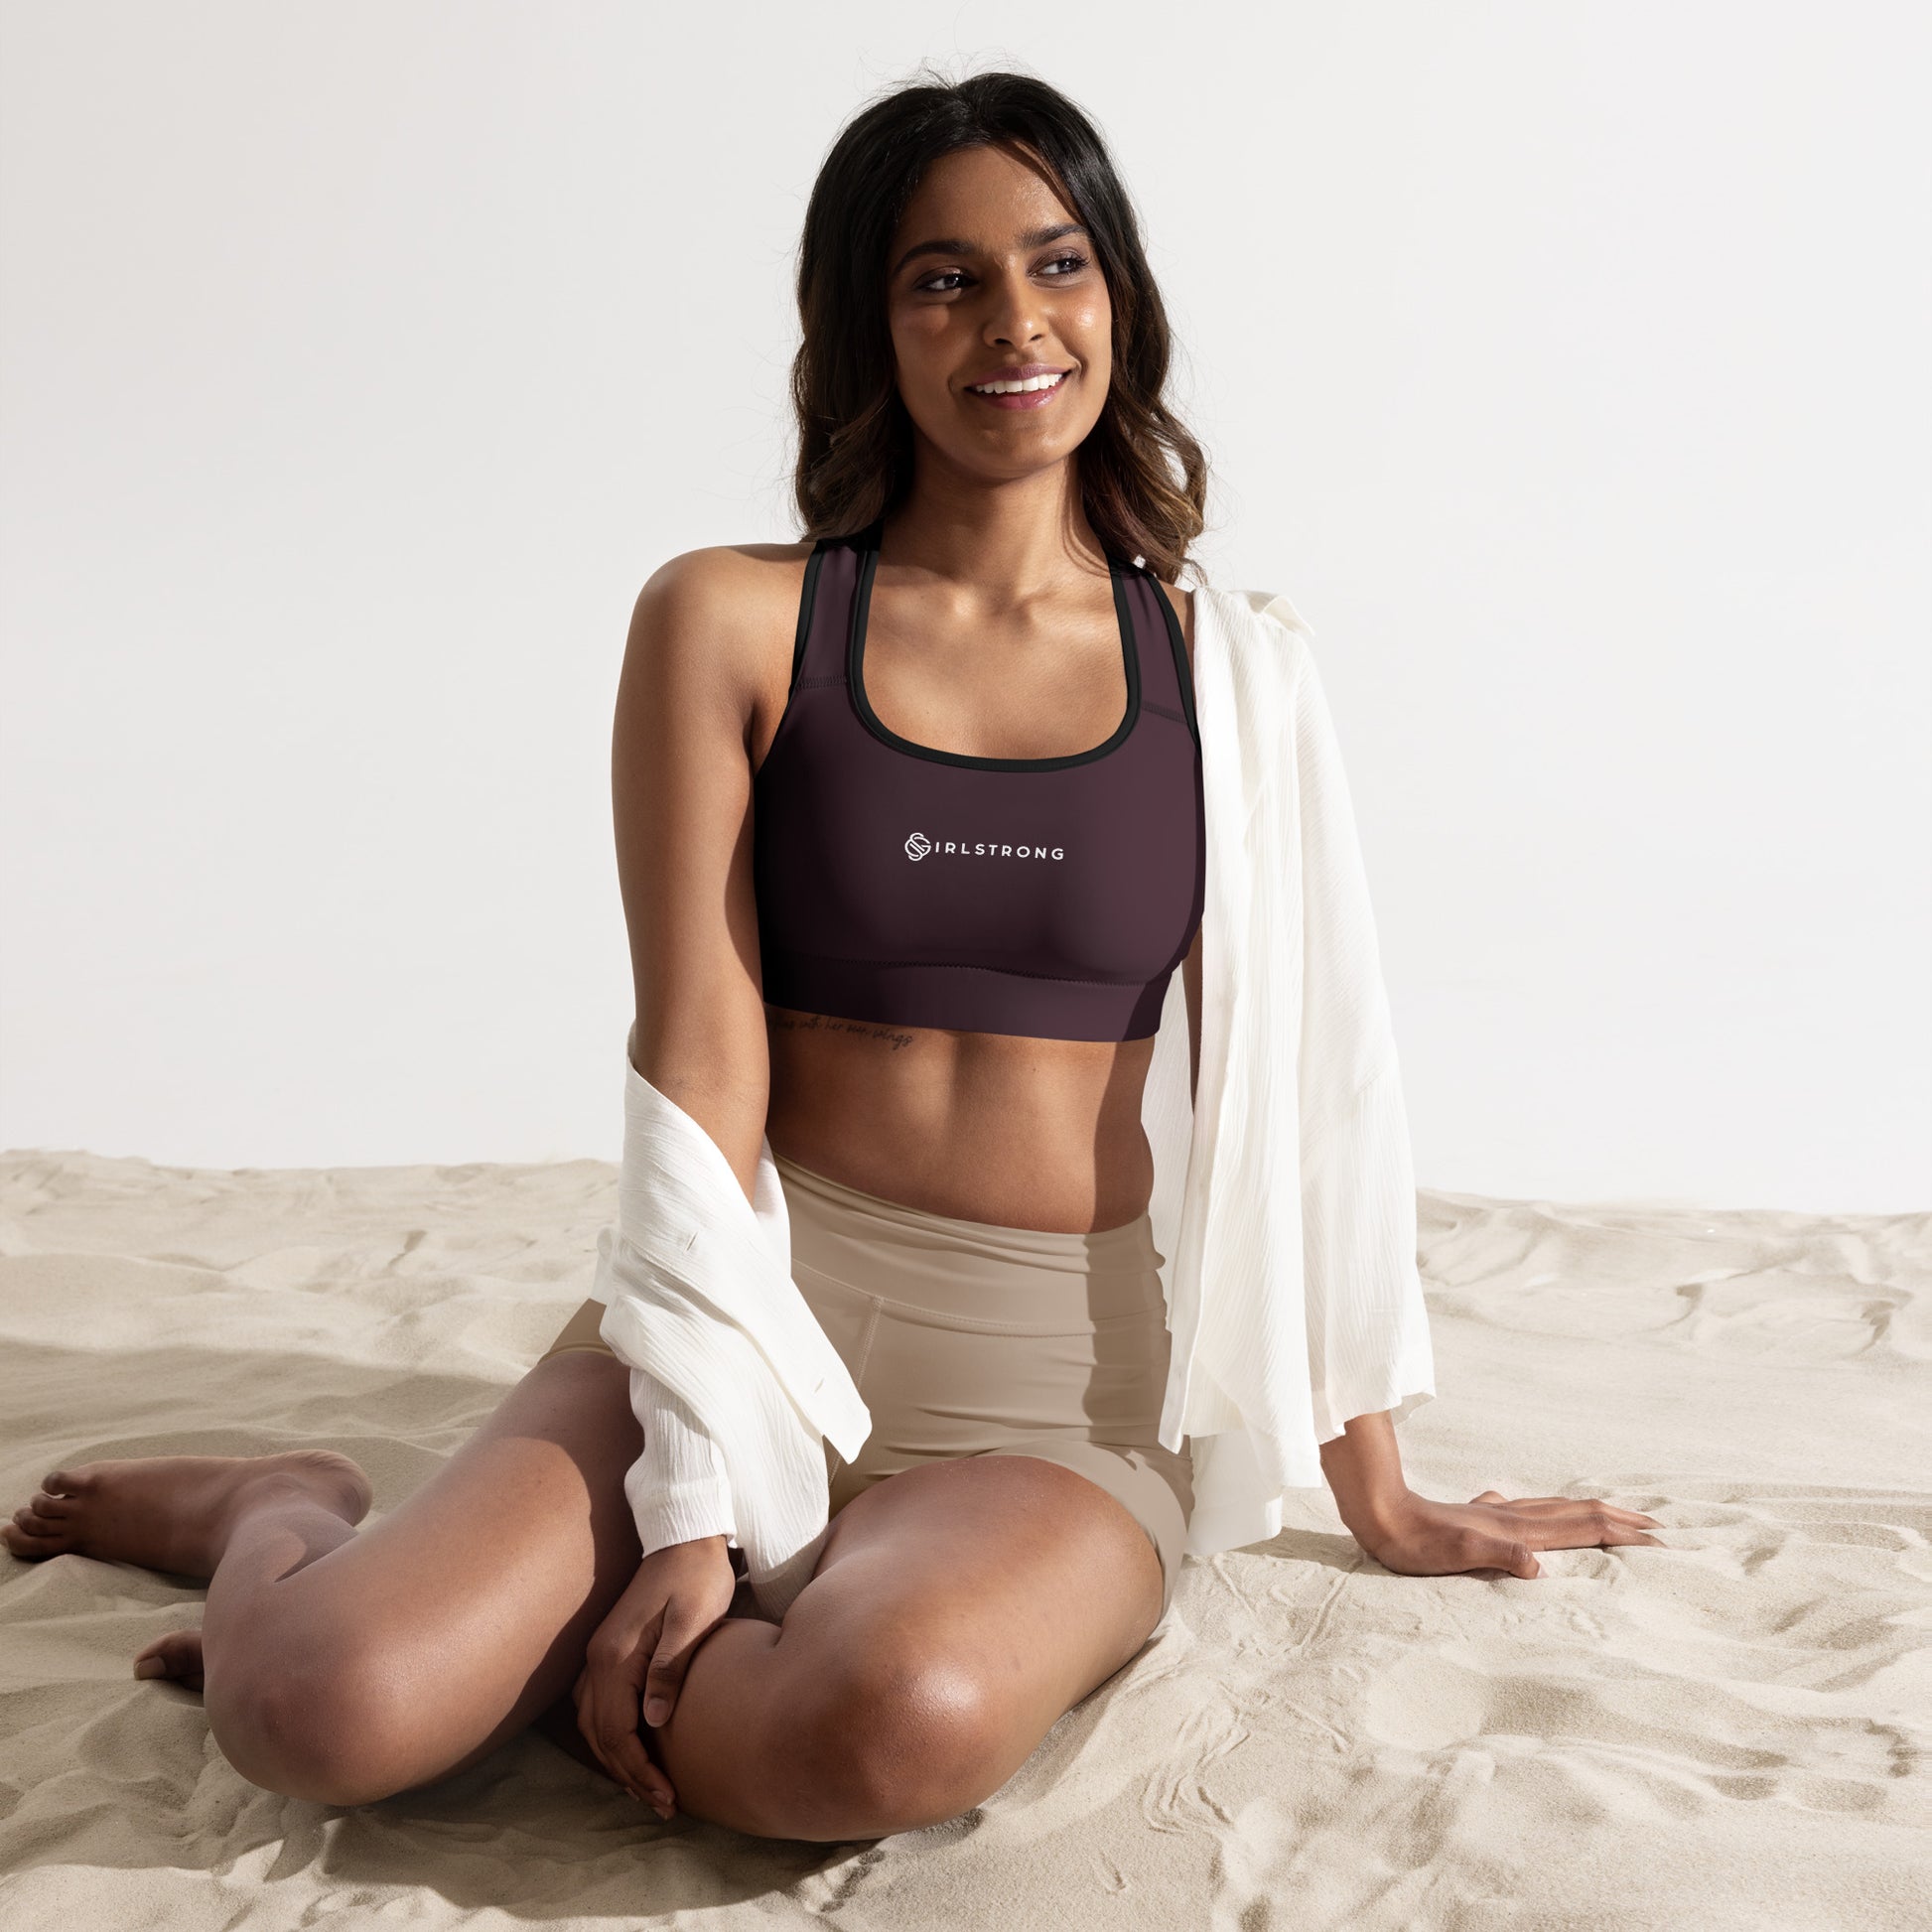 ELEVATED ESSENTIALS, THE PERFECT PADDED SPORTS BRA CABERNET – GIRLSTRONG INC